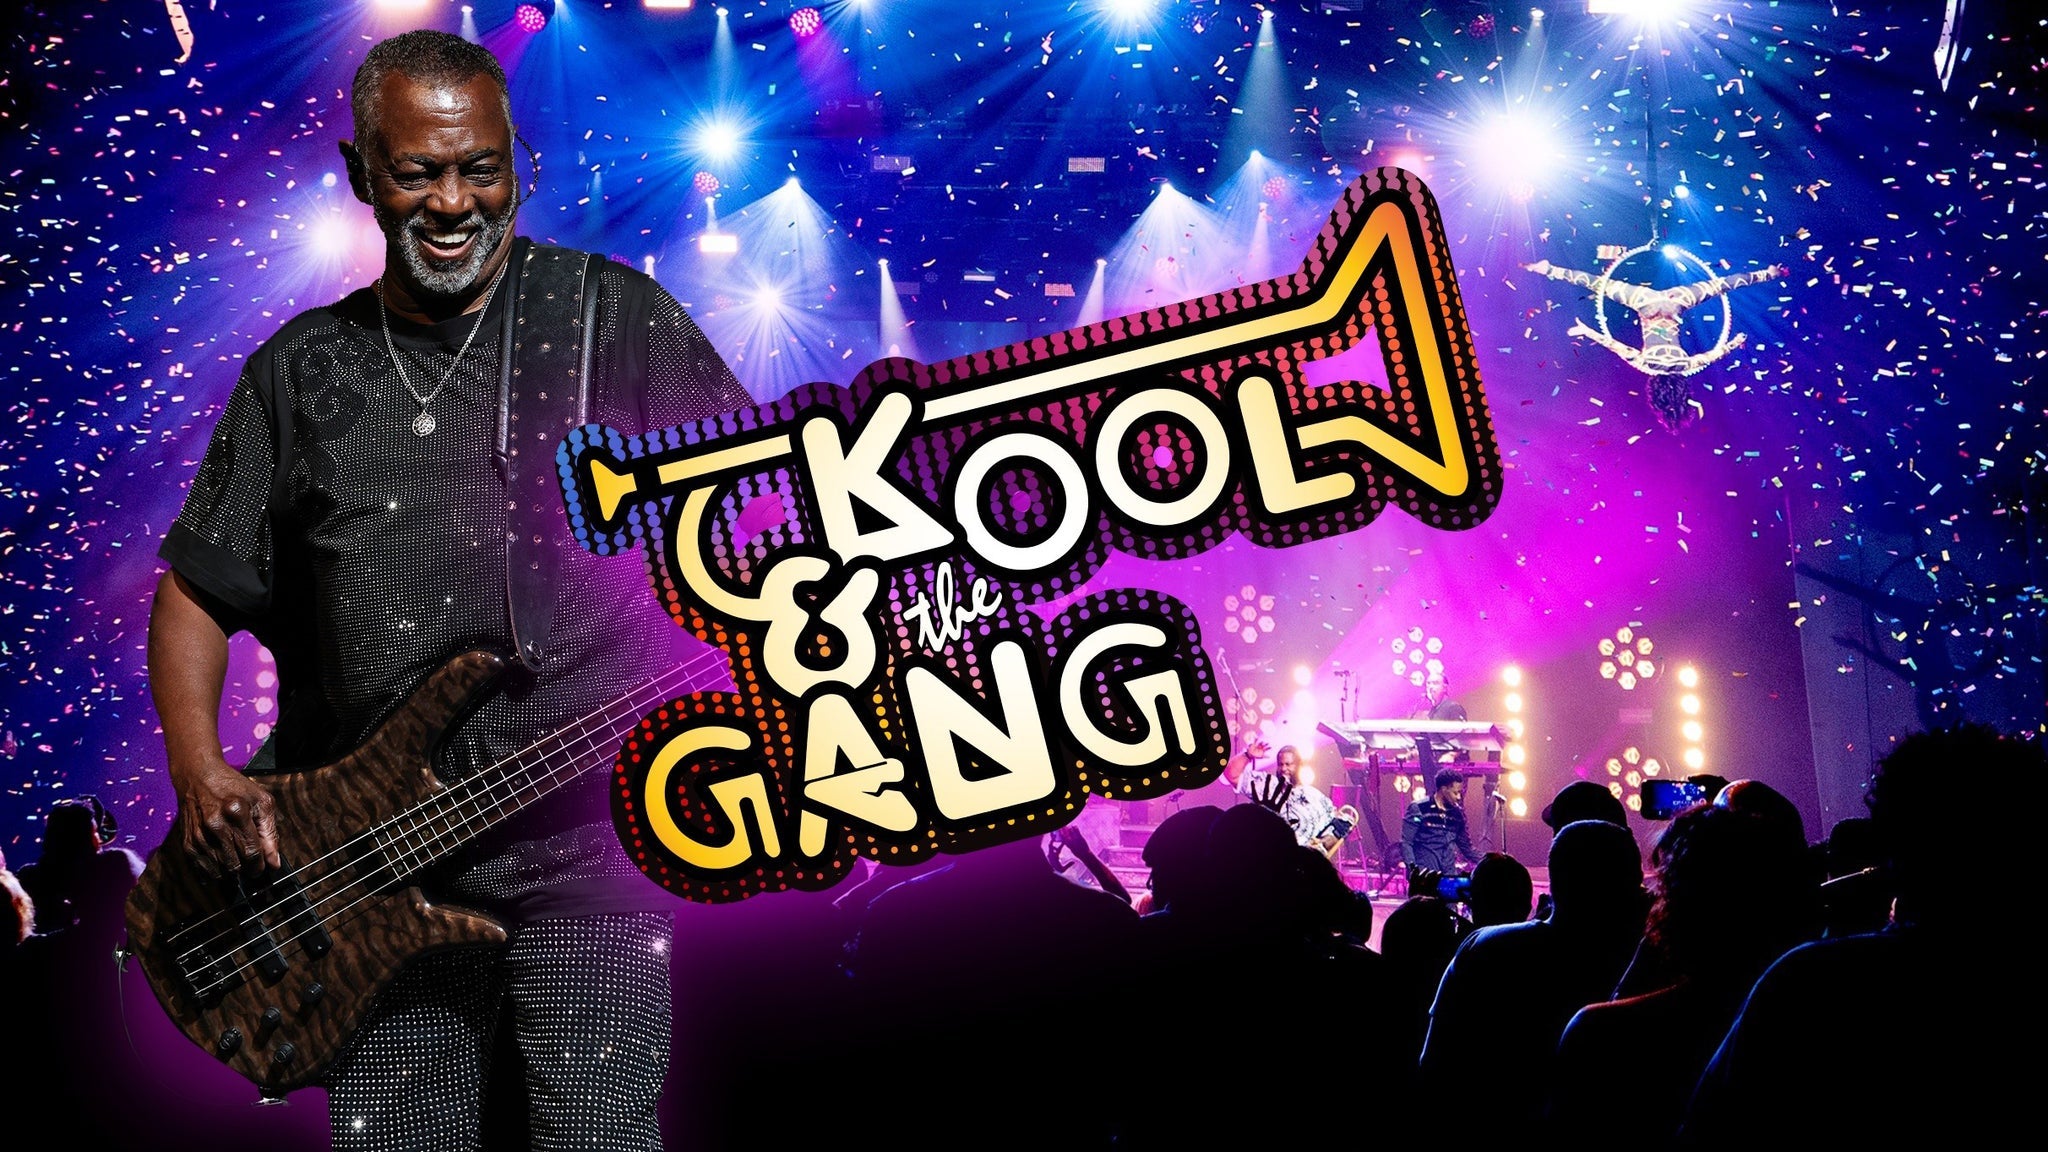 Kool And The Gang w. Morris Day and the Time